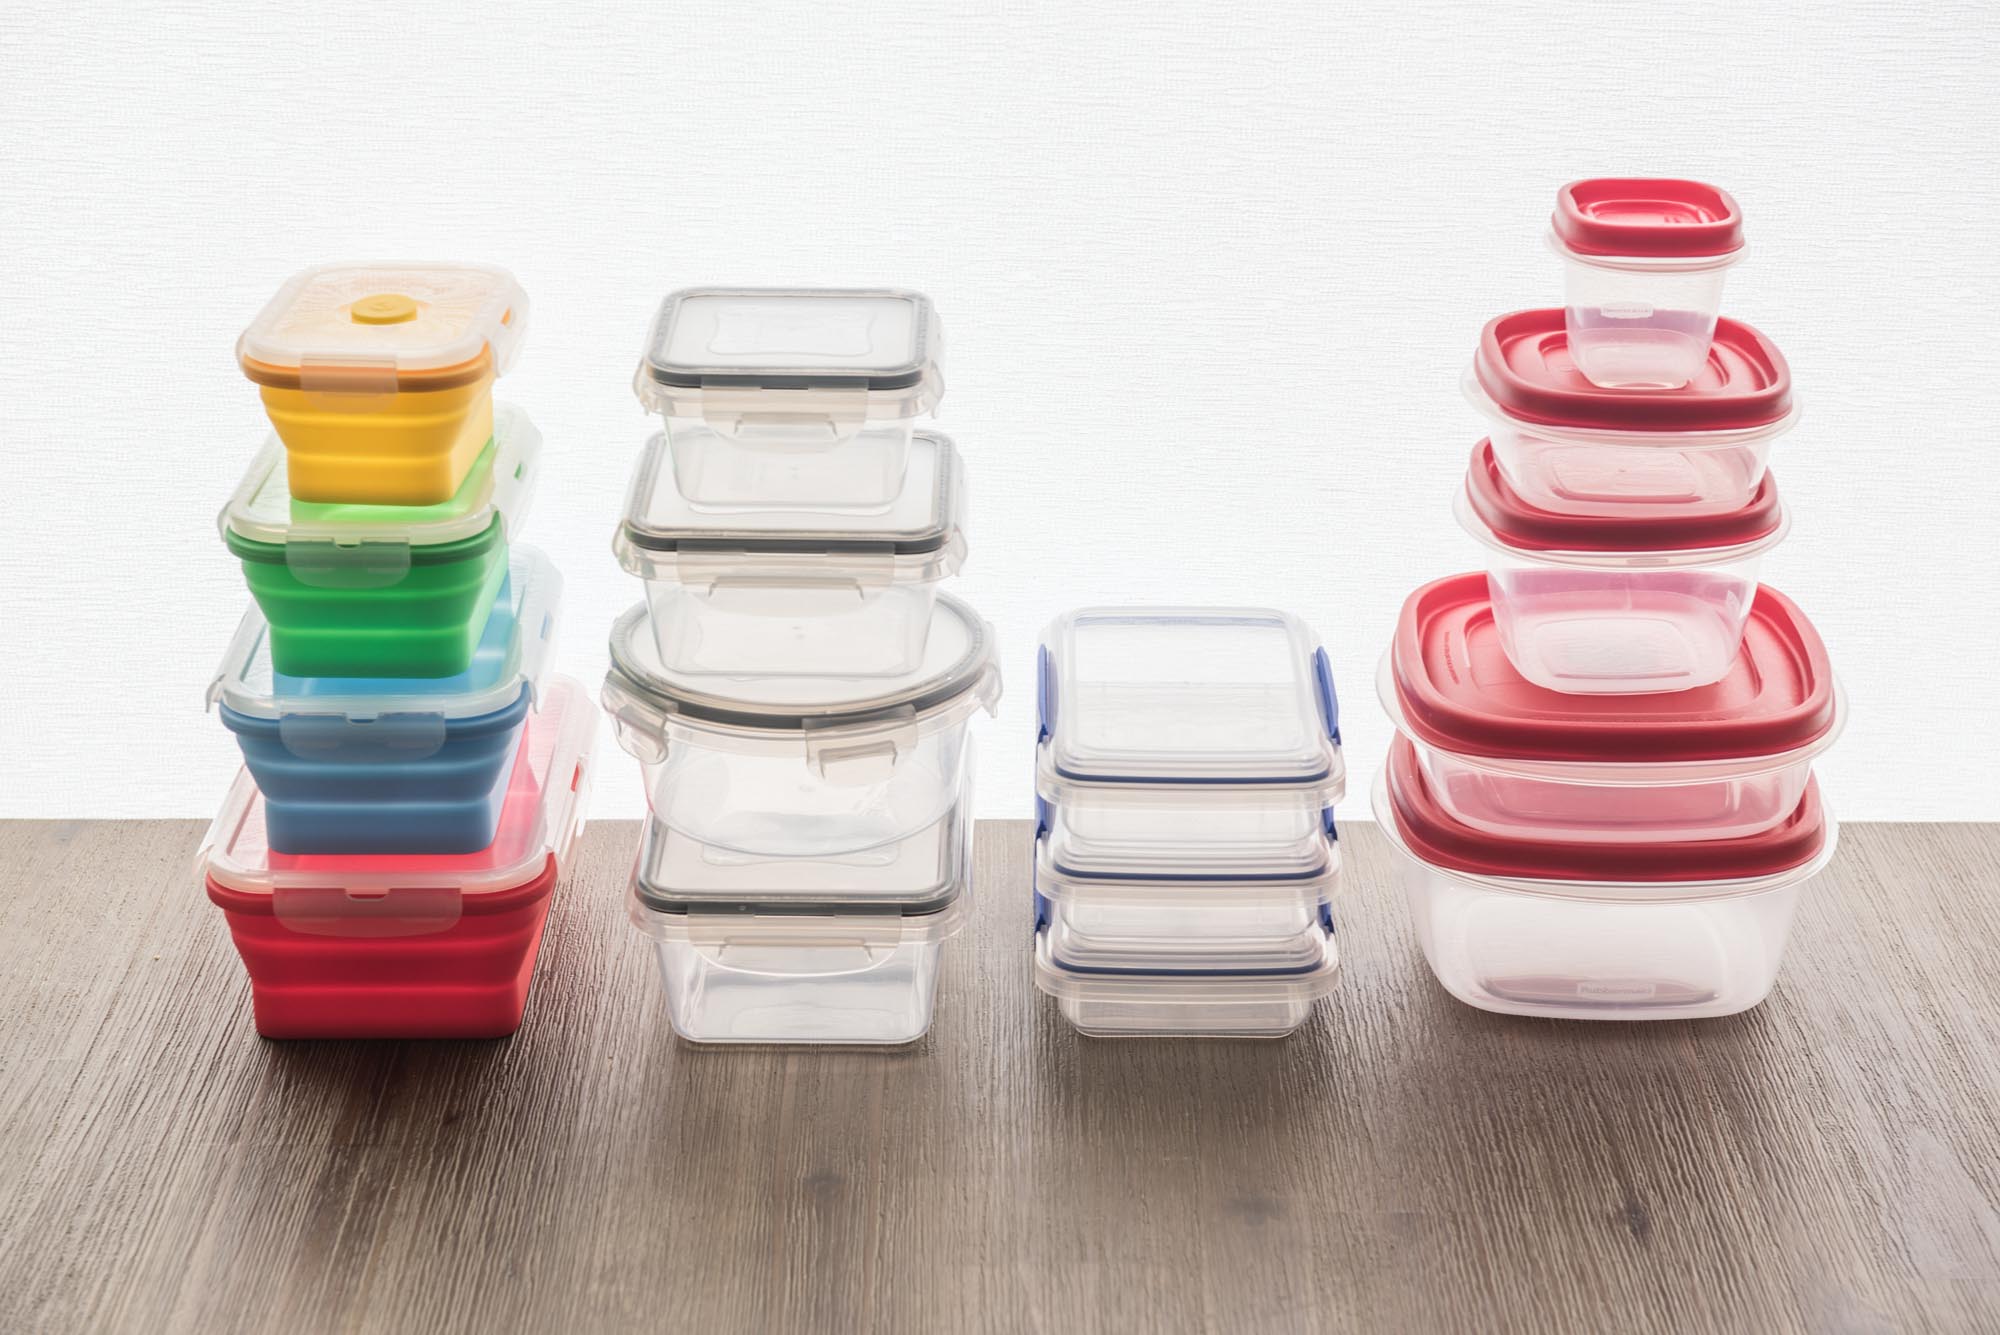 Best Plastic Food Storage Containers, According to Our Expert Tests